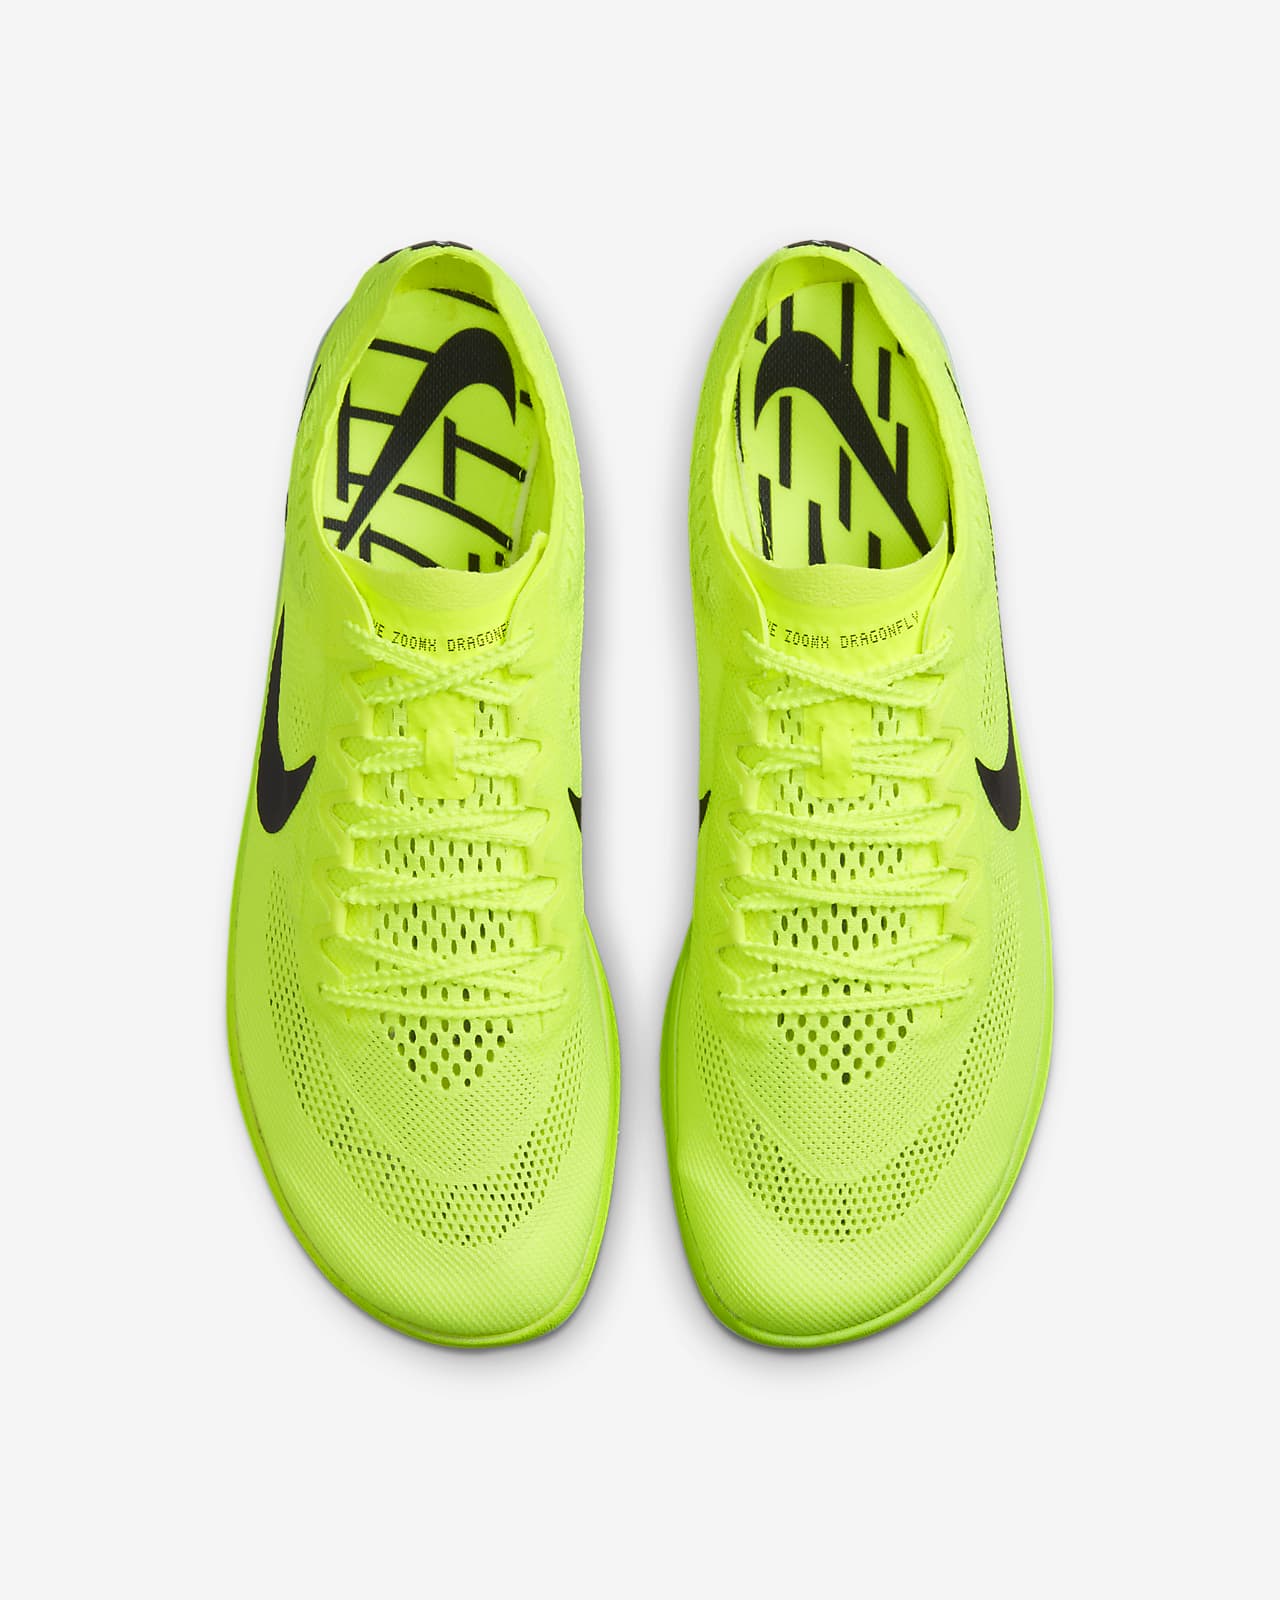 Nike ZoomX Dragonfly Athletics Distance Spikes